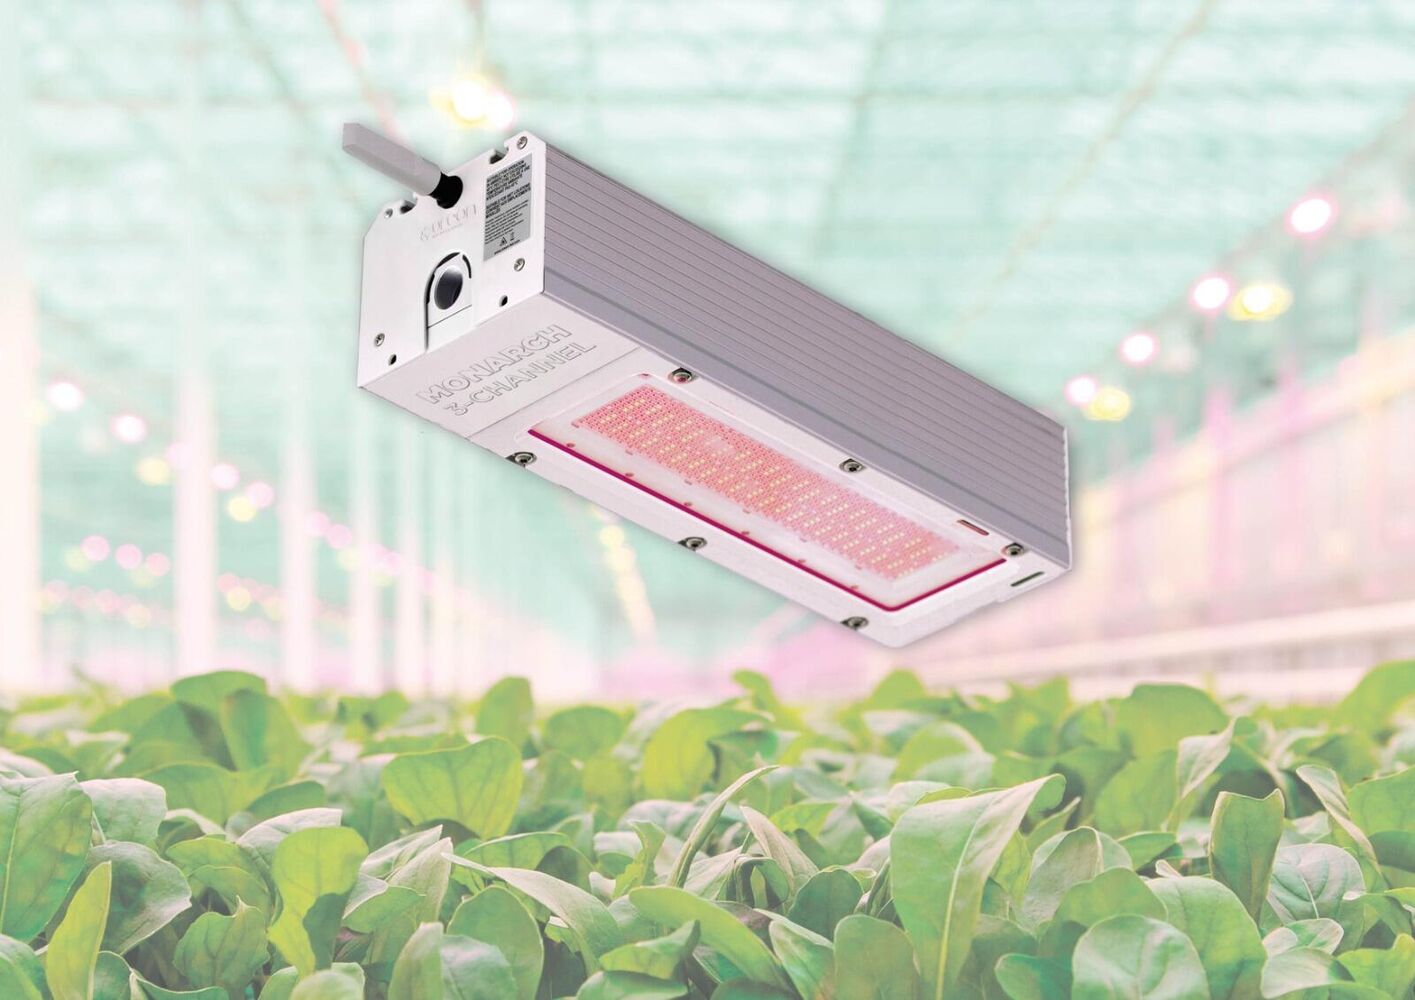 iGrowNews: Introducing the Oreon Monarch 3-Channel LED Toplight